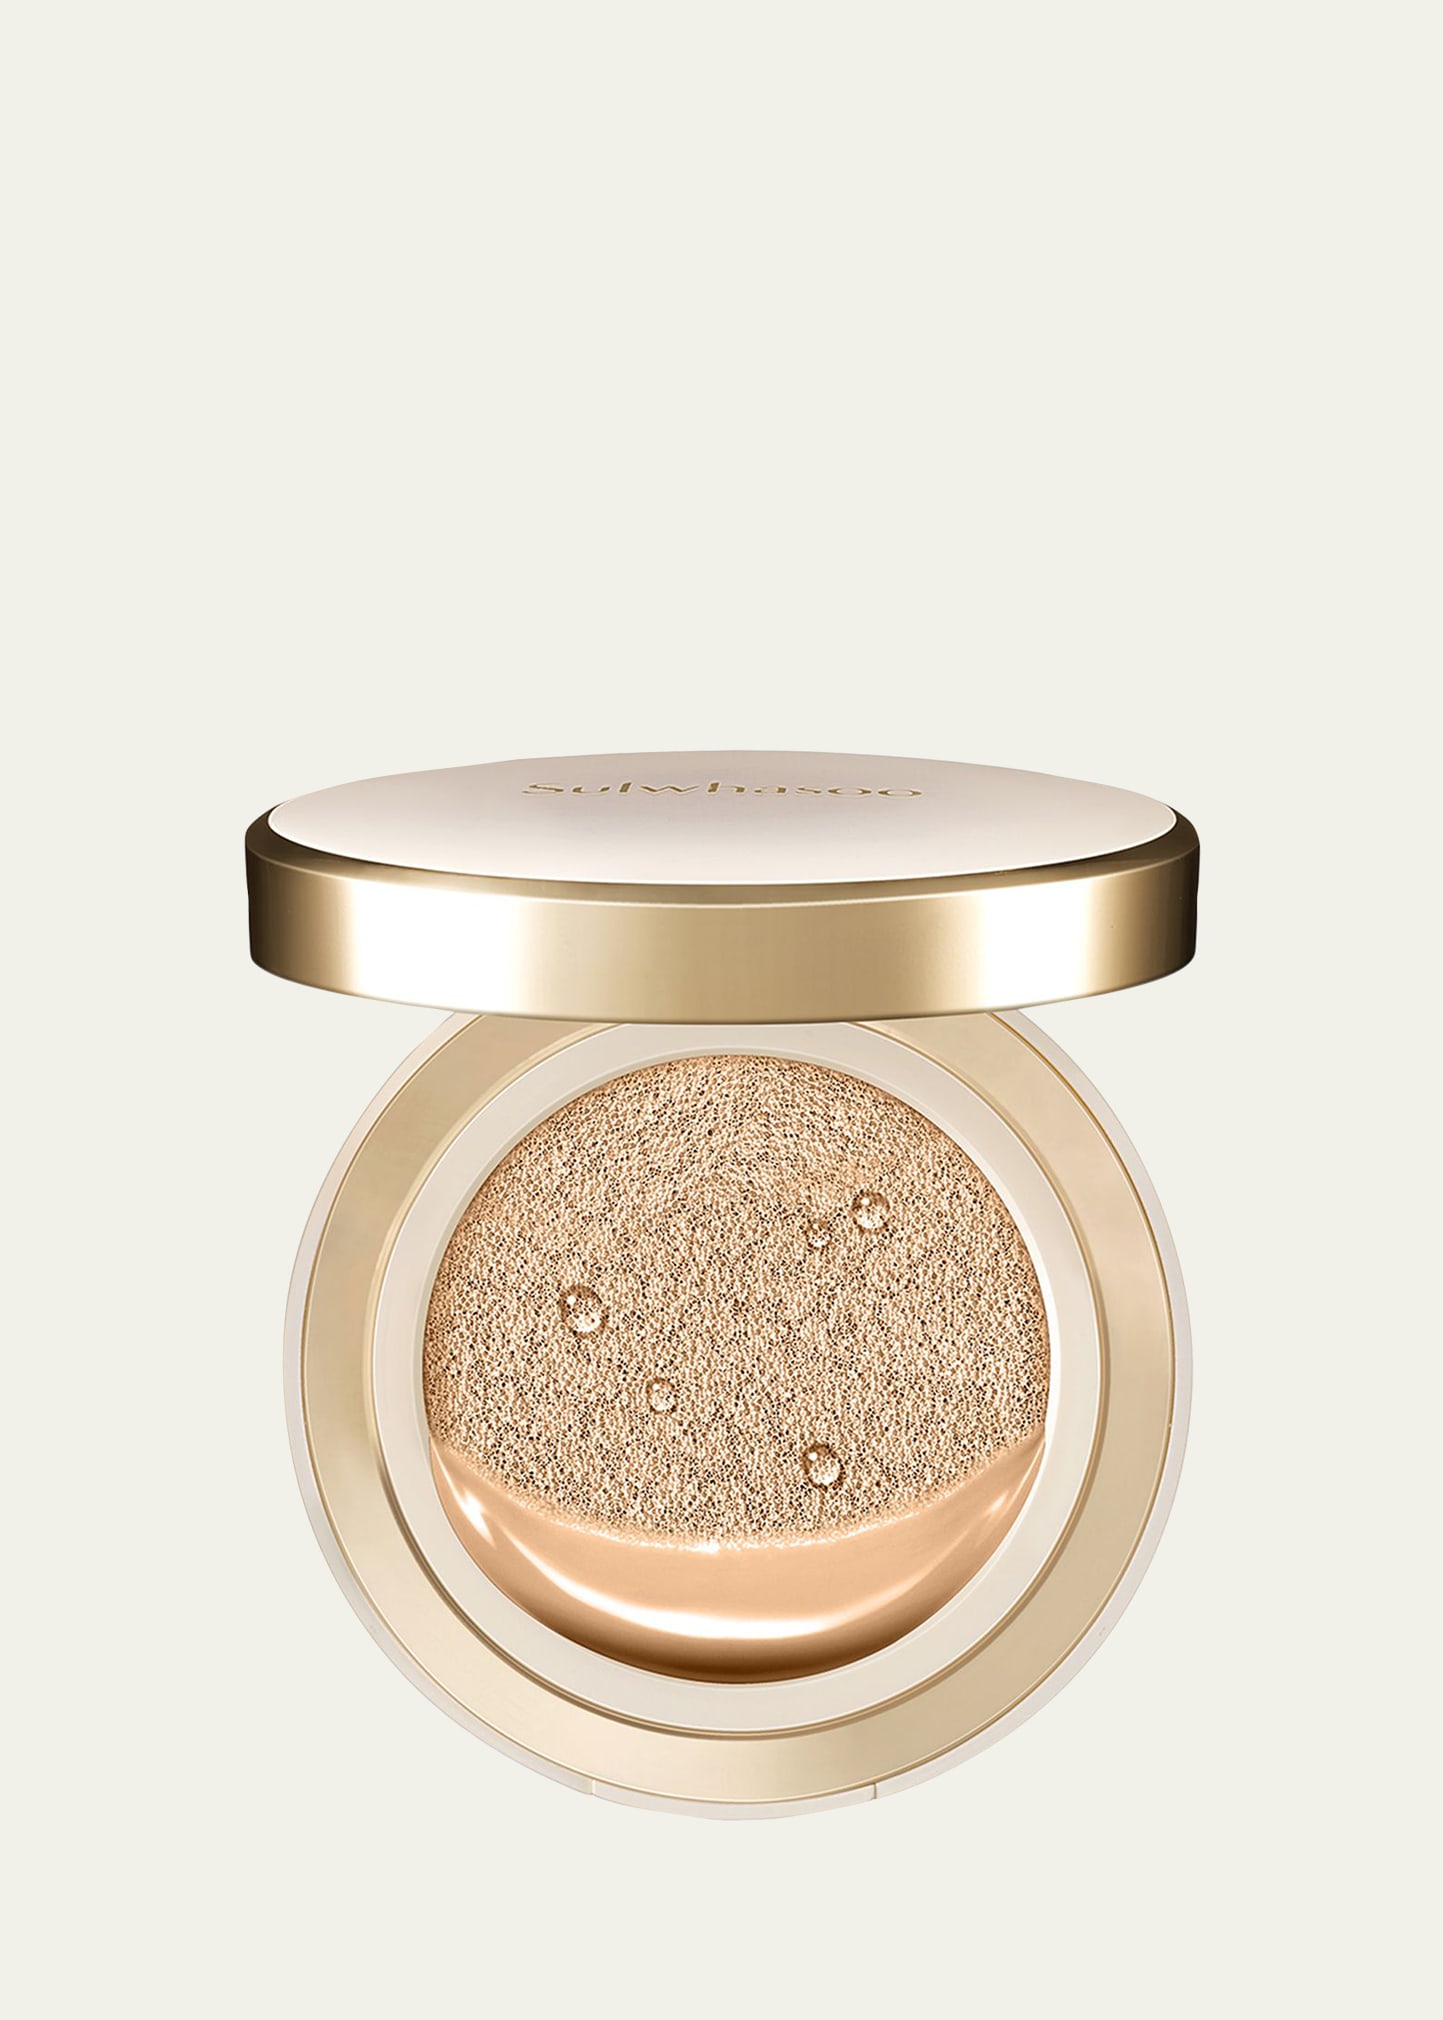 Sulwhasoo Perfecting Cushion In 23 Natural Beige